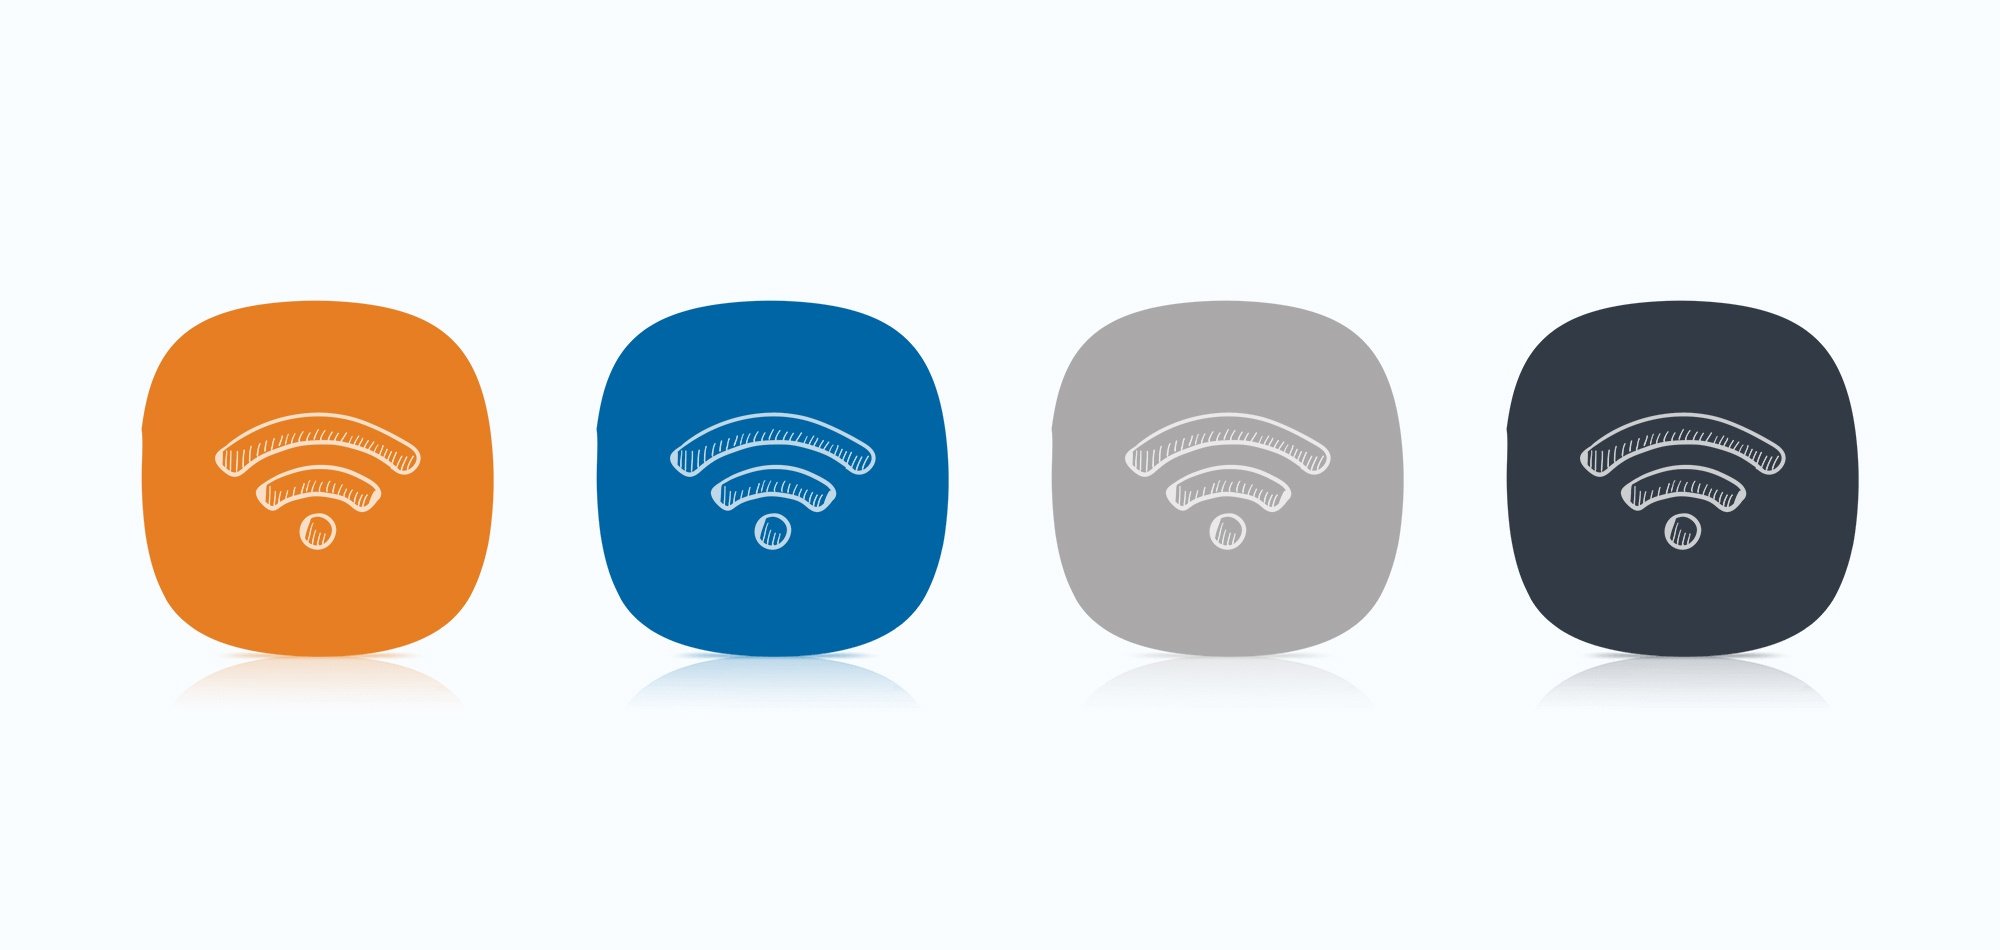 Wi-Fi Basics: What Type of Access Points Do I Need and How Many?